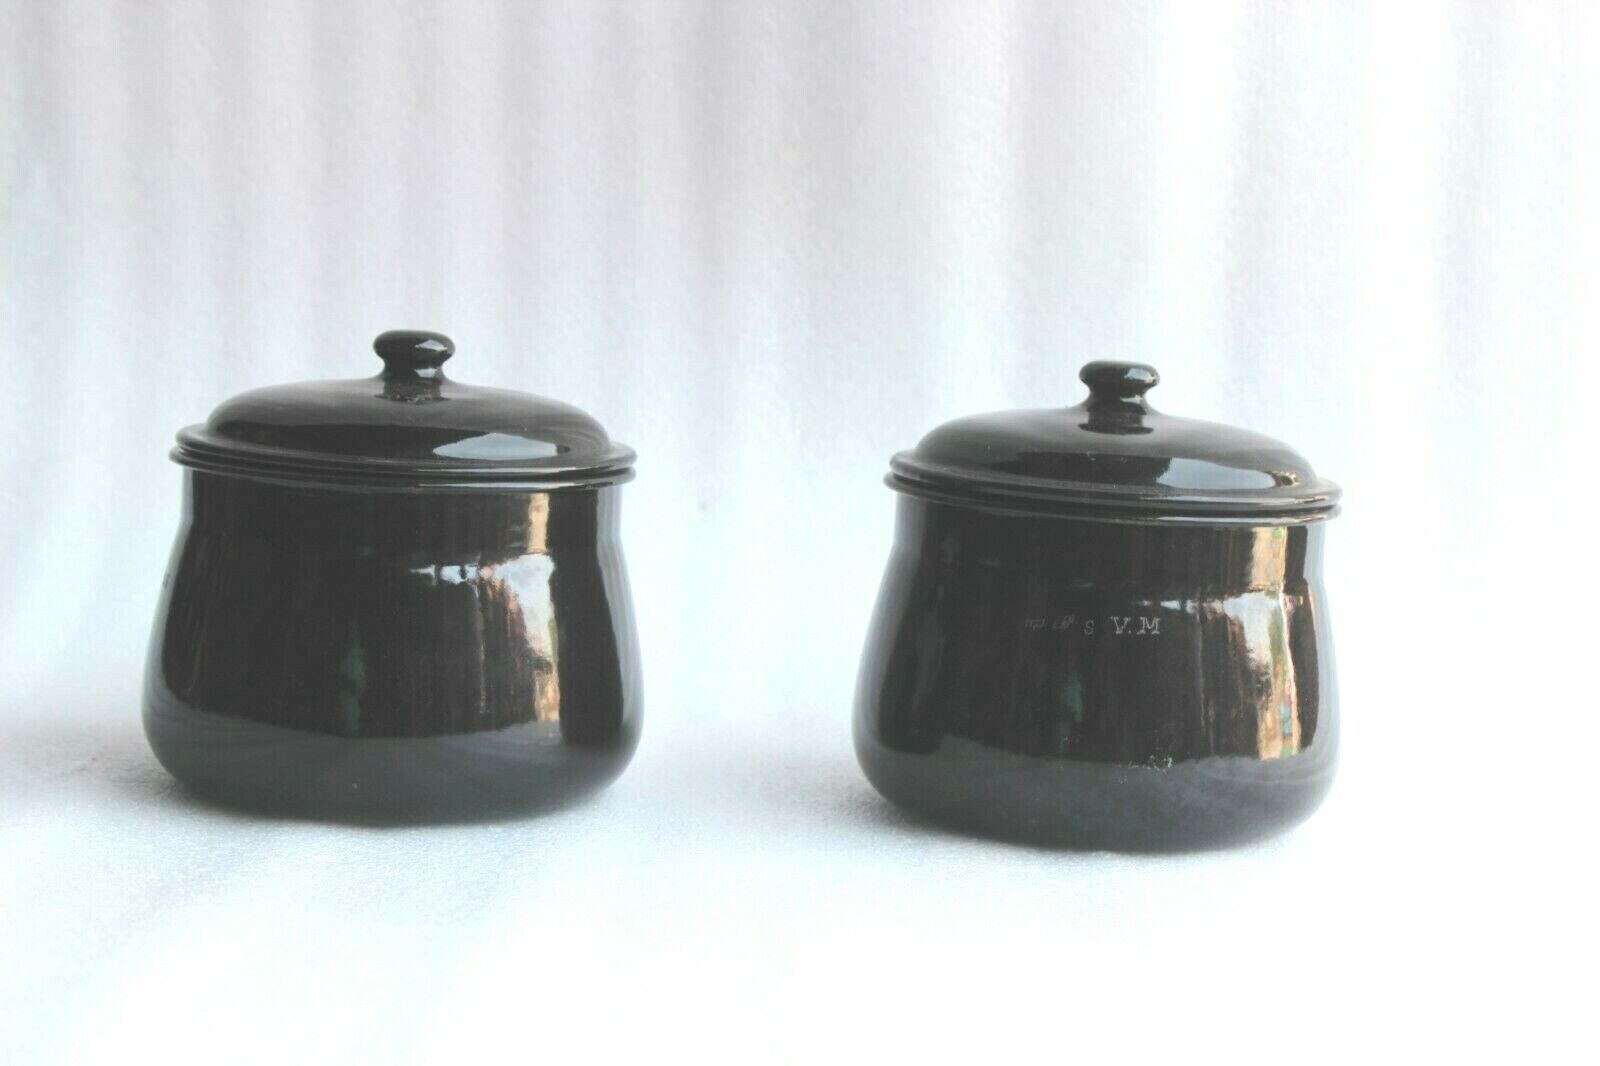 VINTAGE BLACK ENAMEL STOCKPOT WITH LID BEST KITCHENWARE COLLECTIBLE BV-6